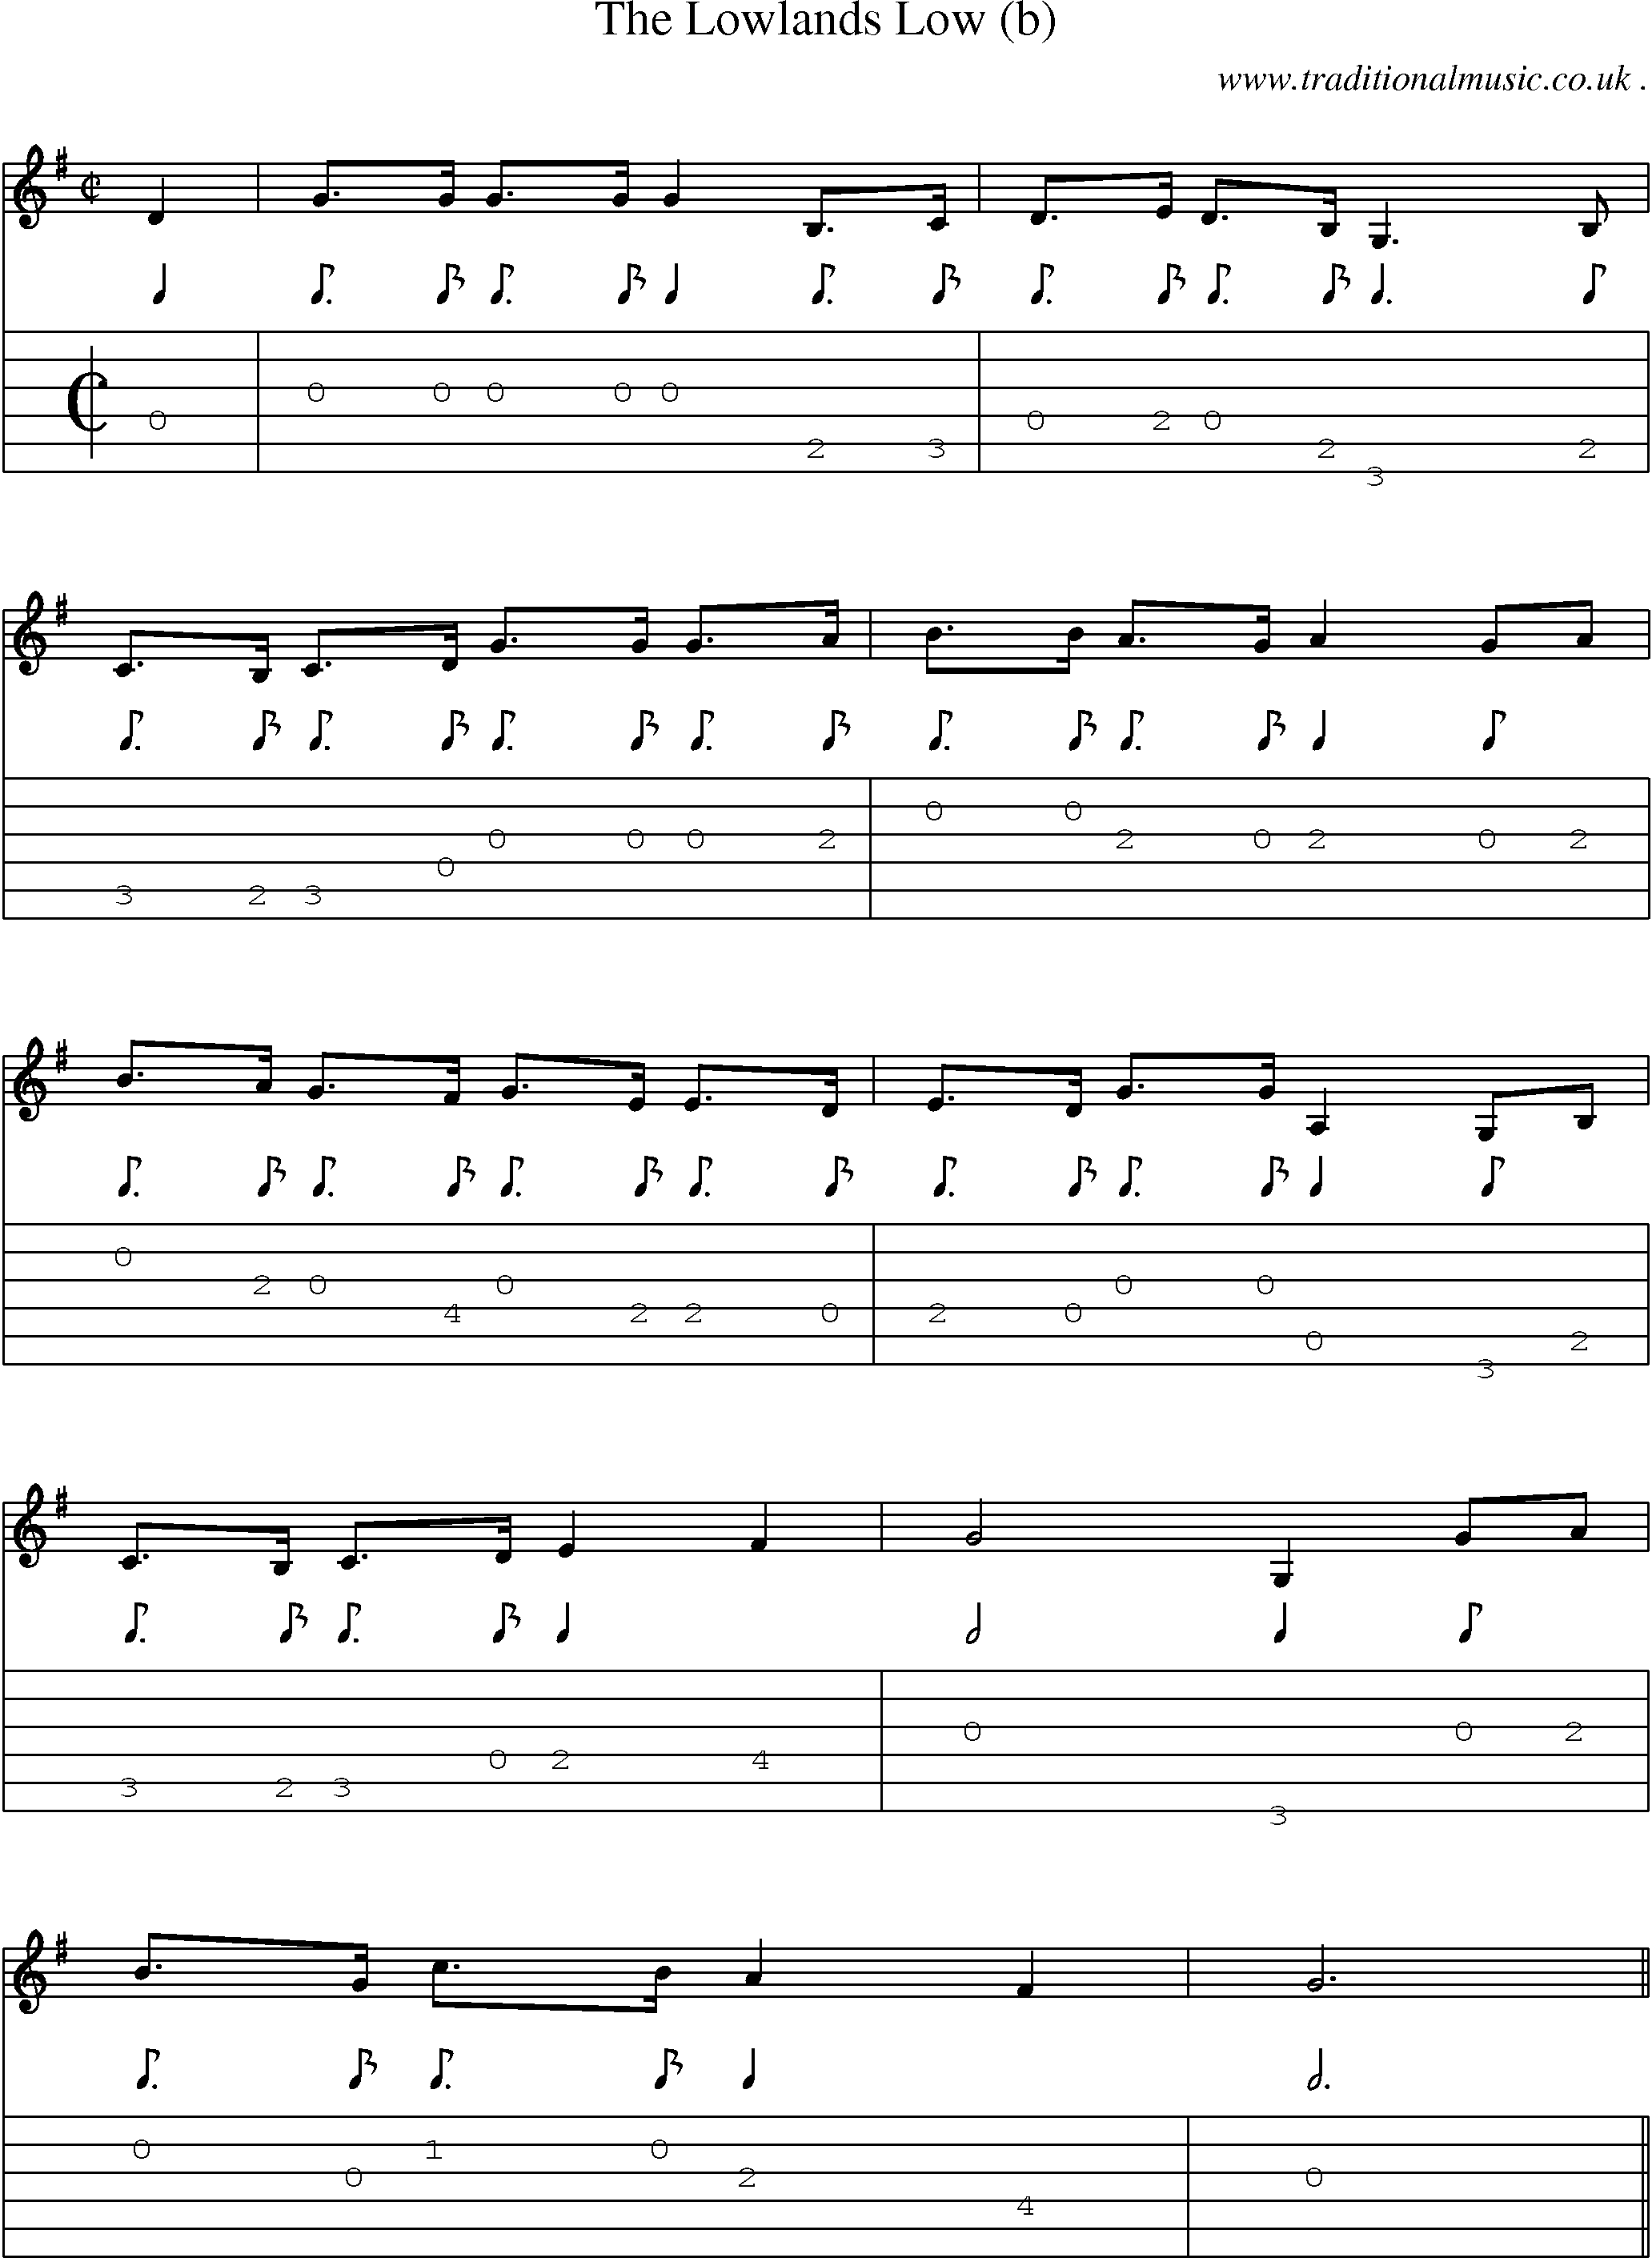 Sheet-Music and Guitar Tabs for The Lowlands Low (b)